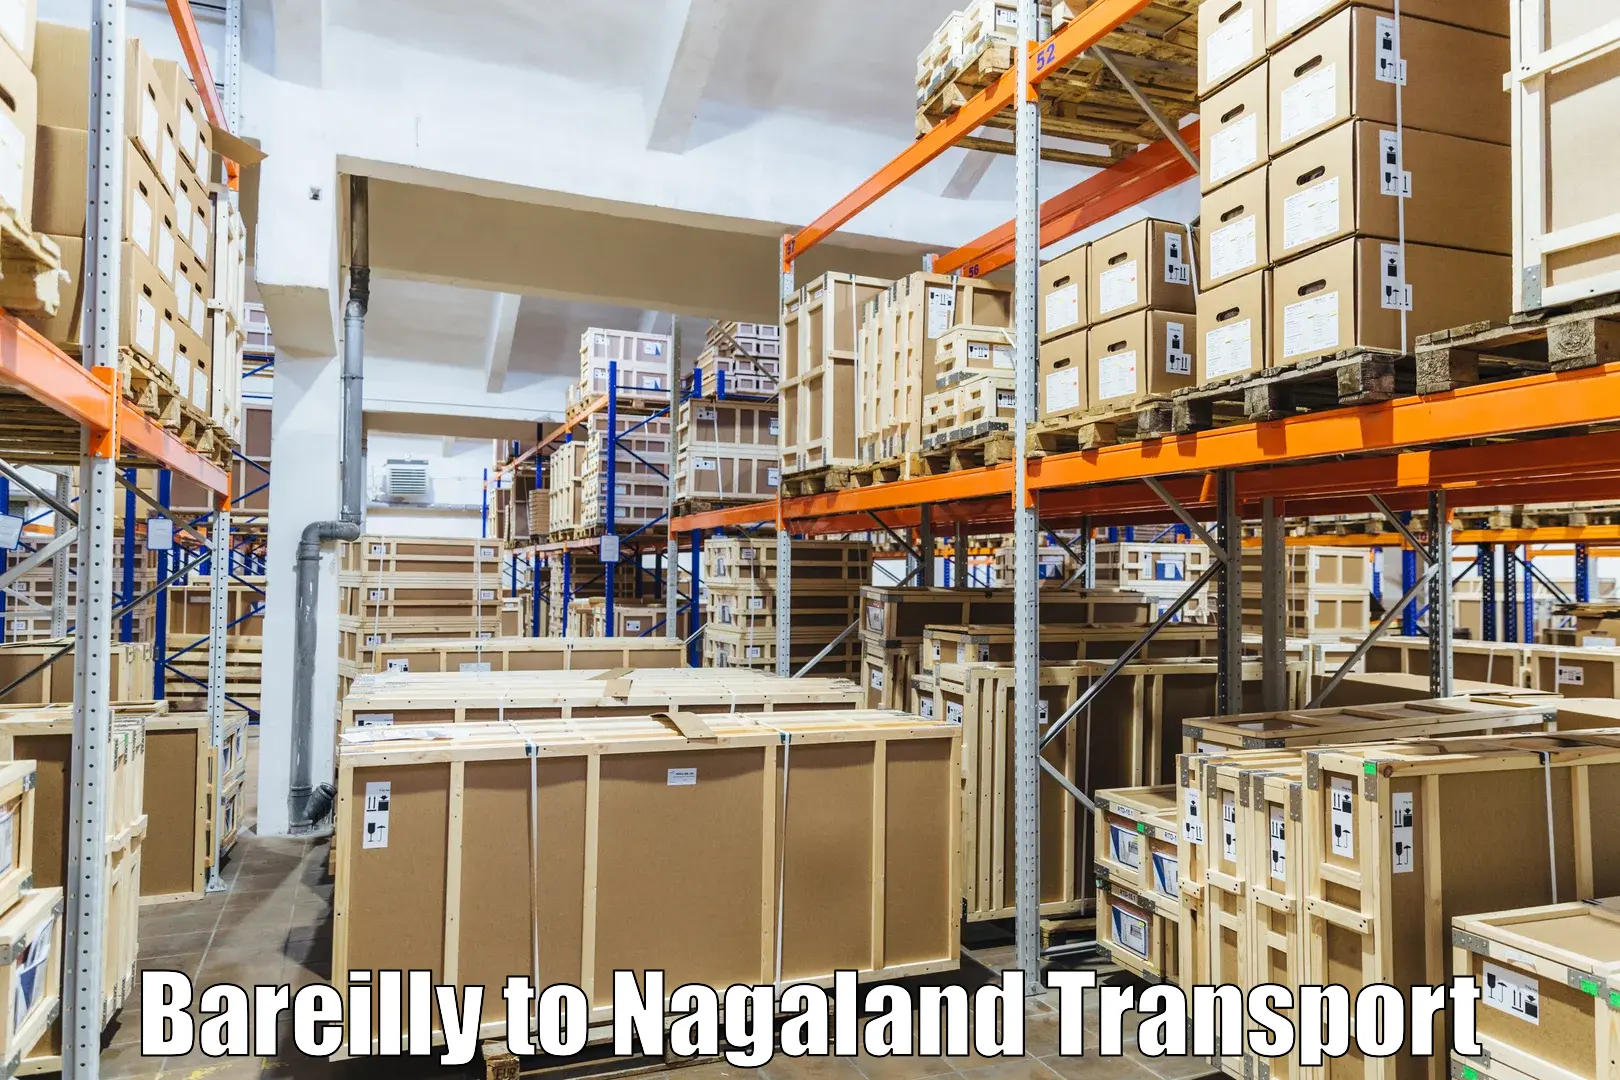 Transport in sharing Bareilly to Nagaland